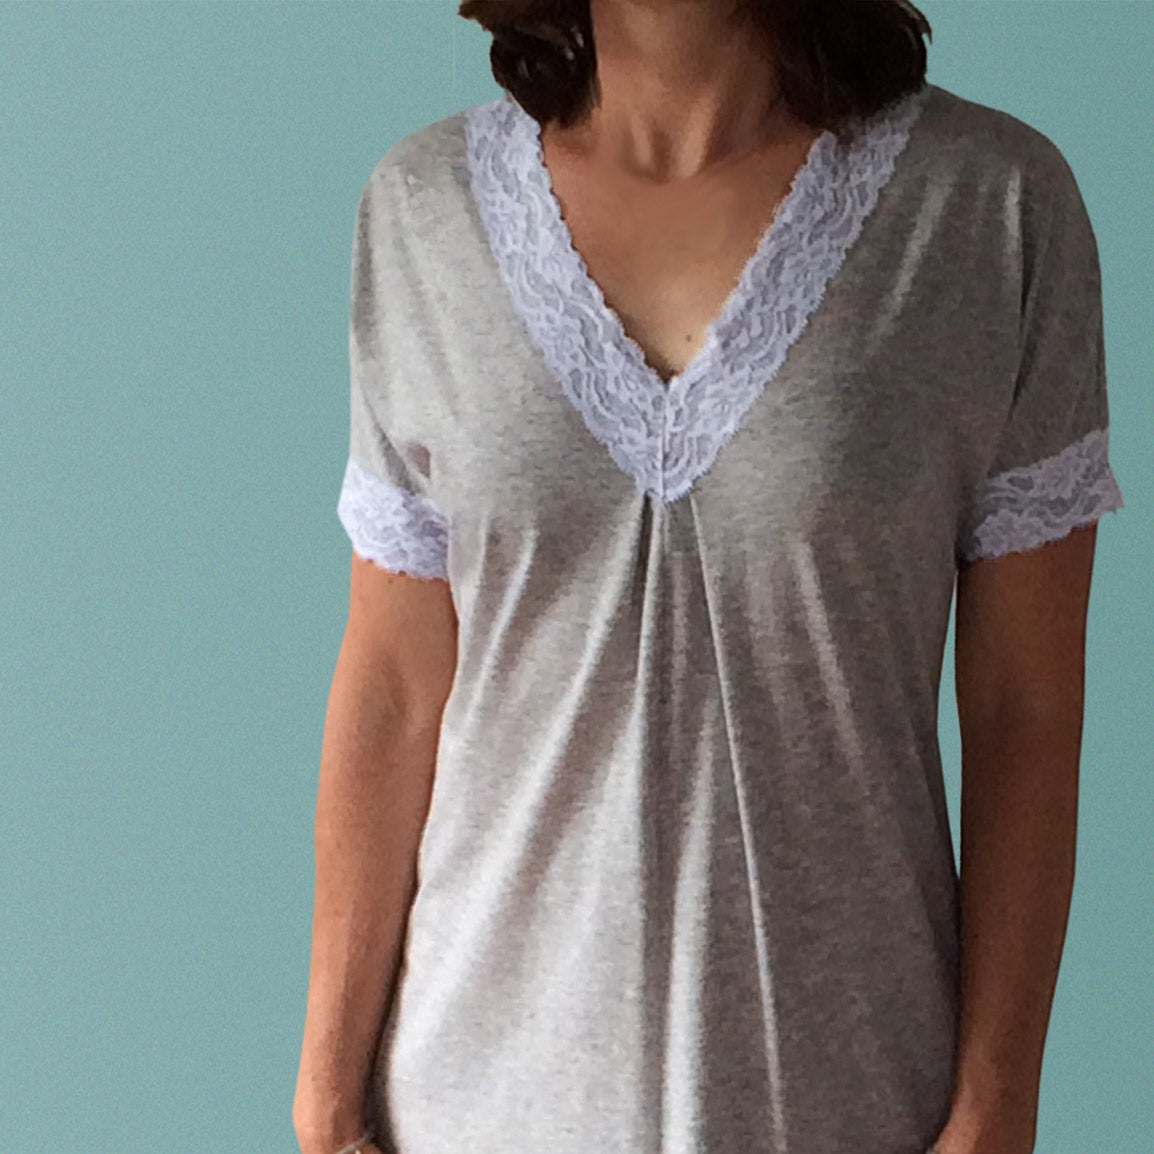 Nighties for plus size made in Australia. Organic cotton and lace nightgown.